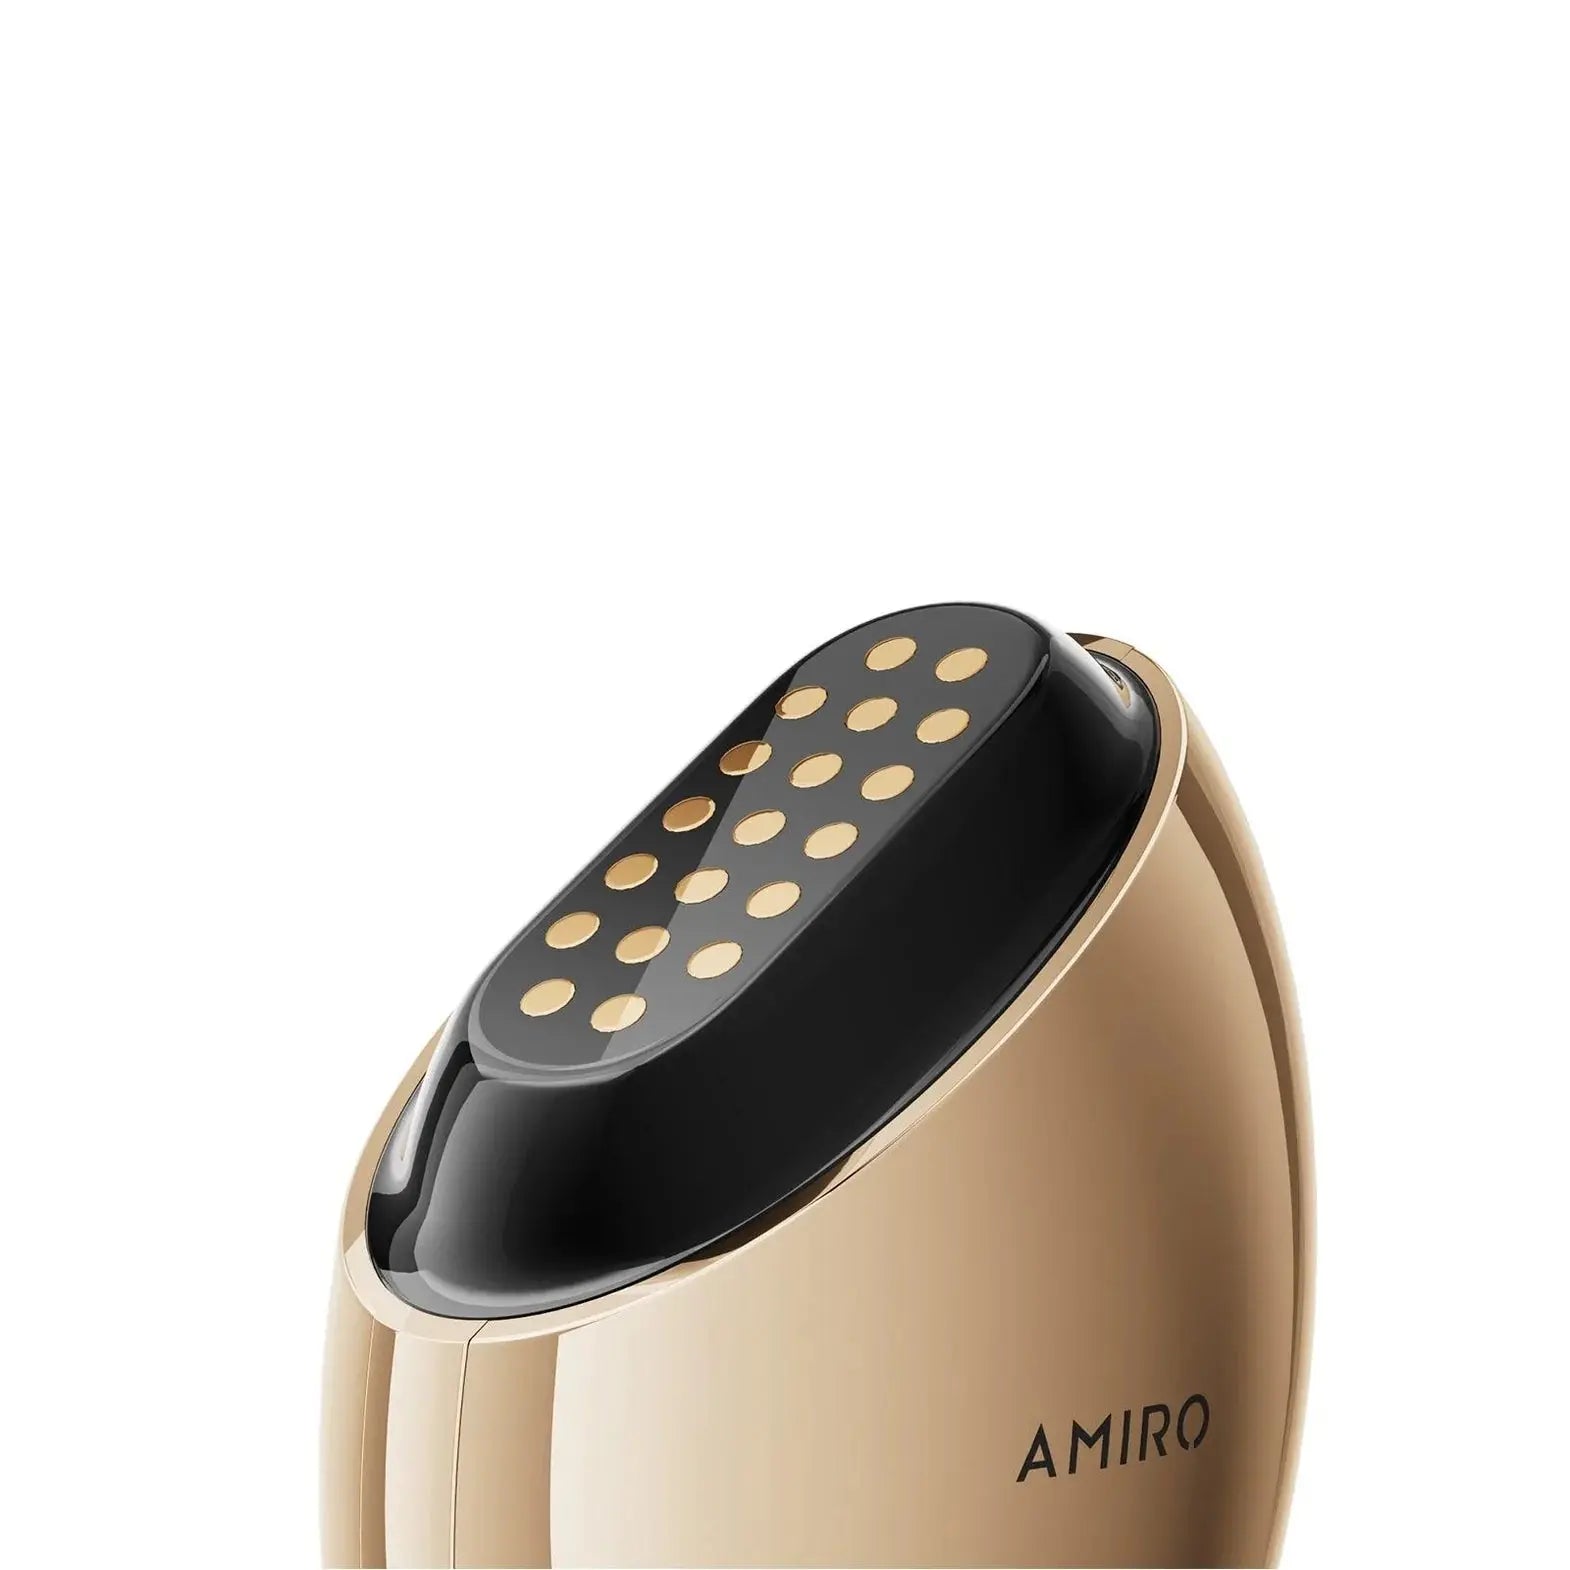 The Best At Home Skin Tightening Device 2022 - AMIRO